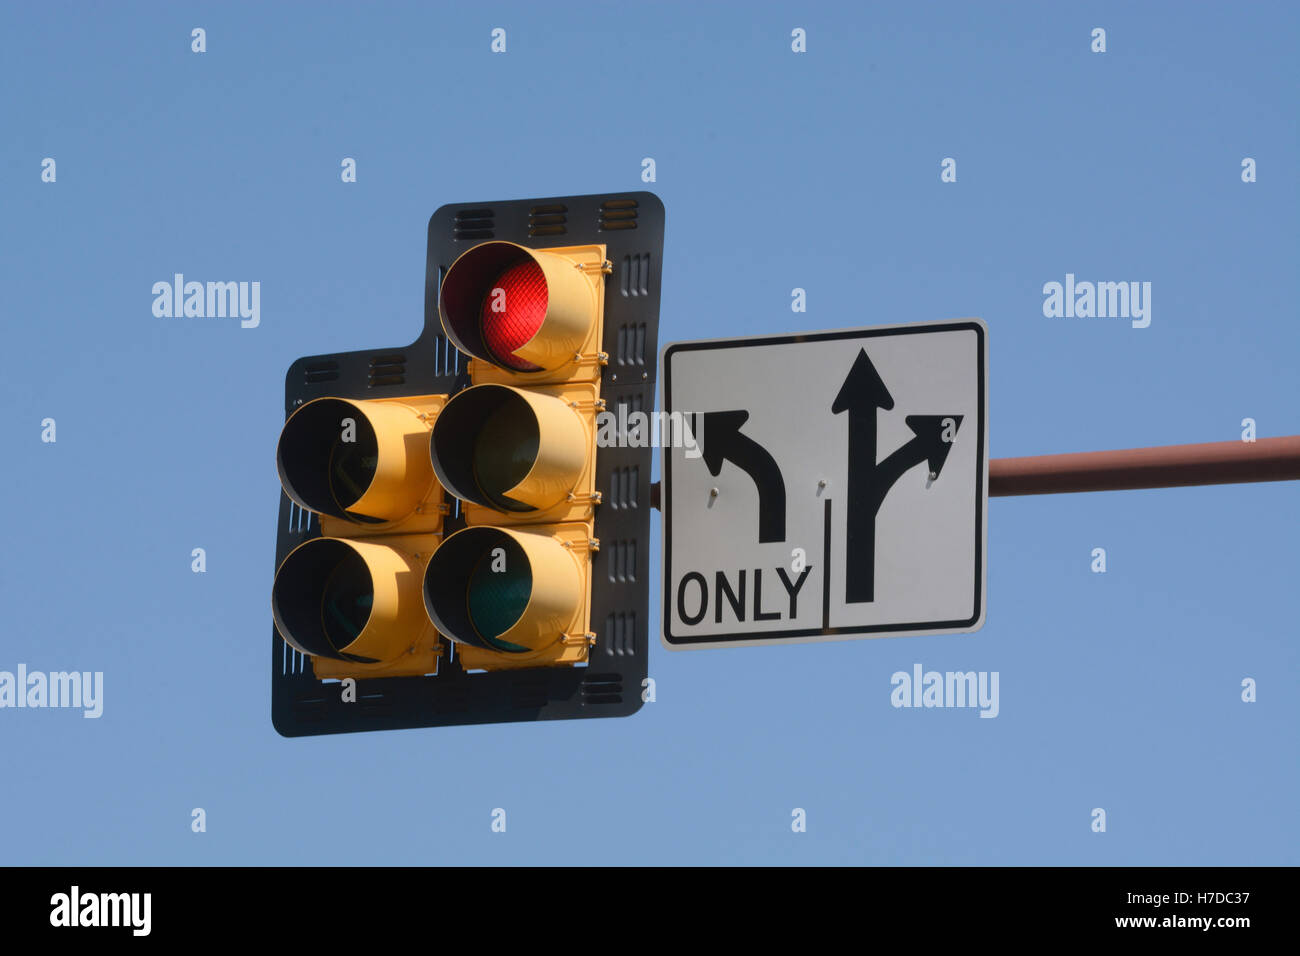 Red traffic light signal and sign for left turn only and left or straight ahead lanes Stock Photo